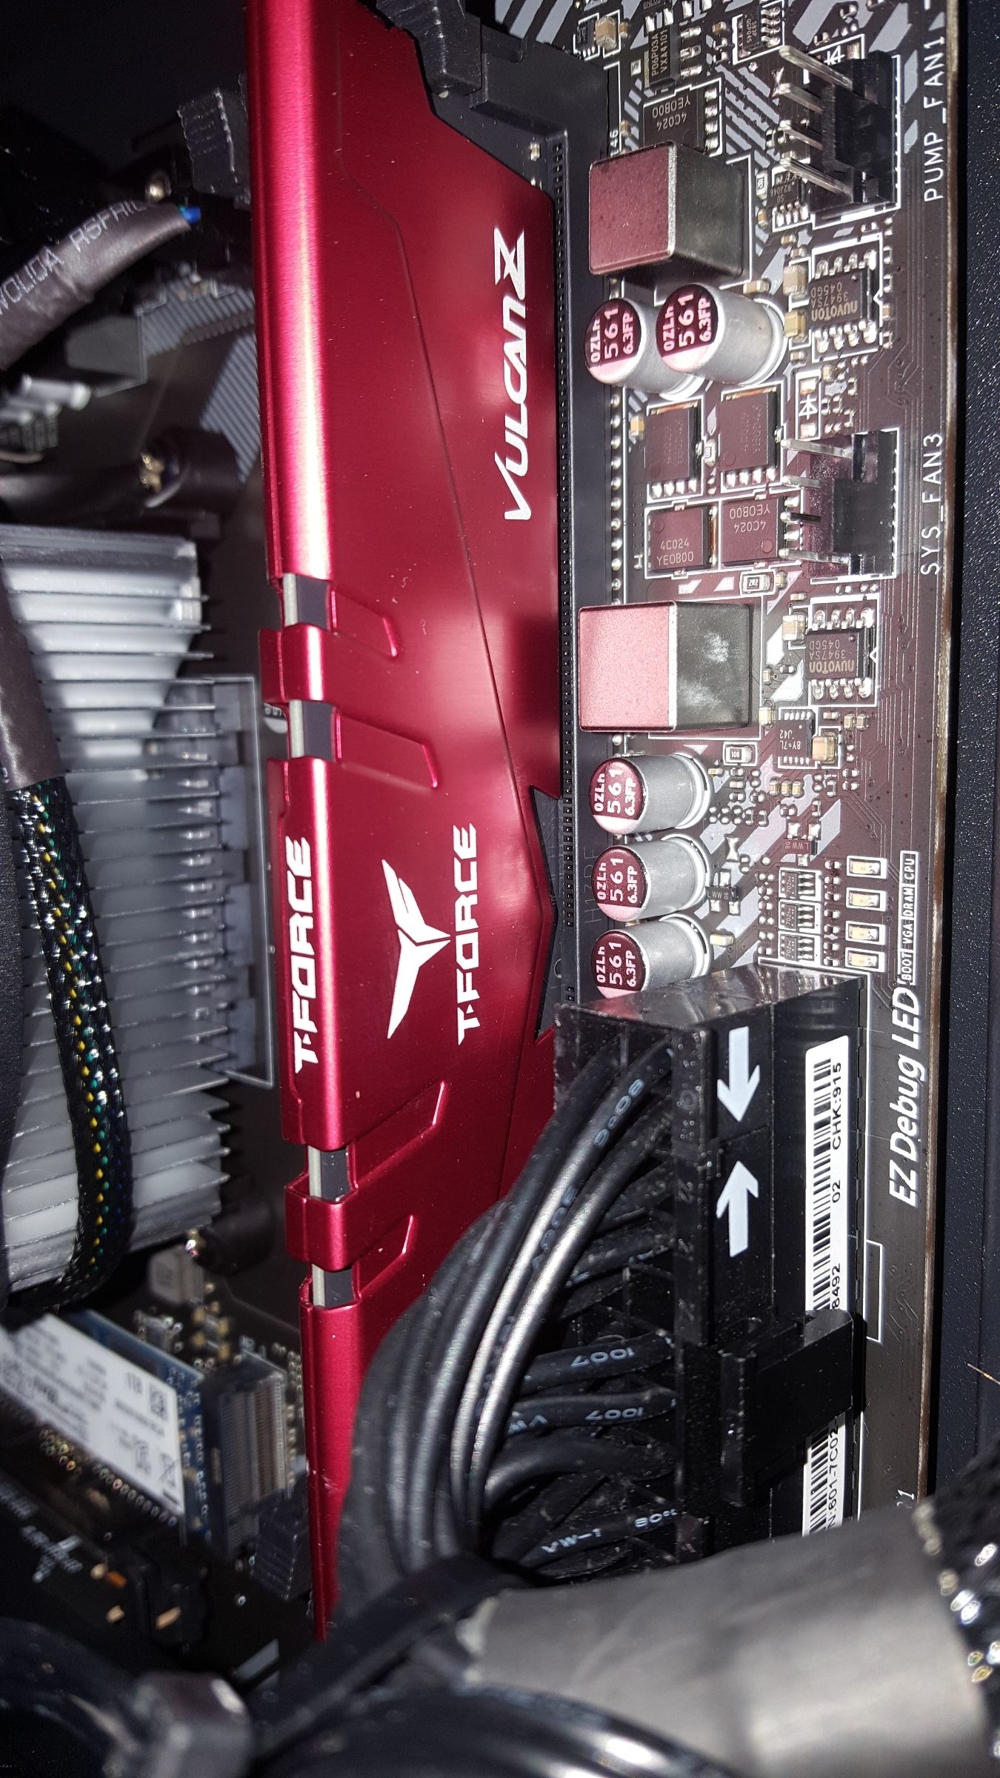 Teamgroup UD4 3200 DDR4 - T-Force VulcanZ - DDR4 RAM - rot